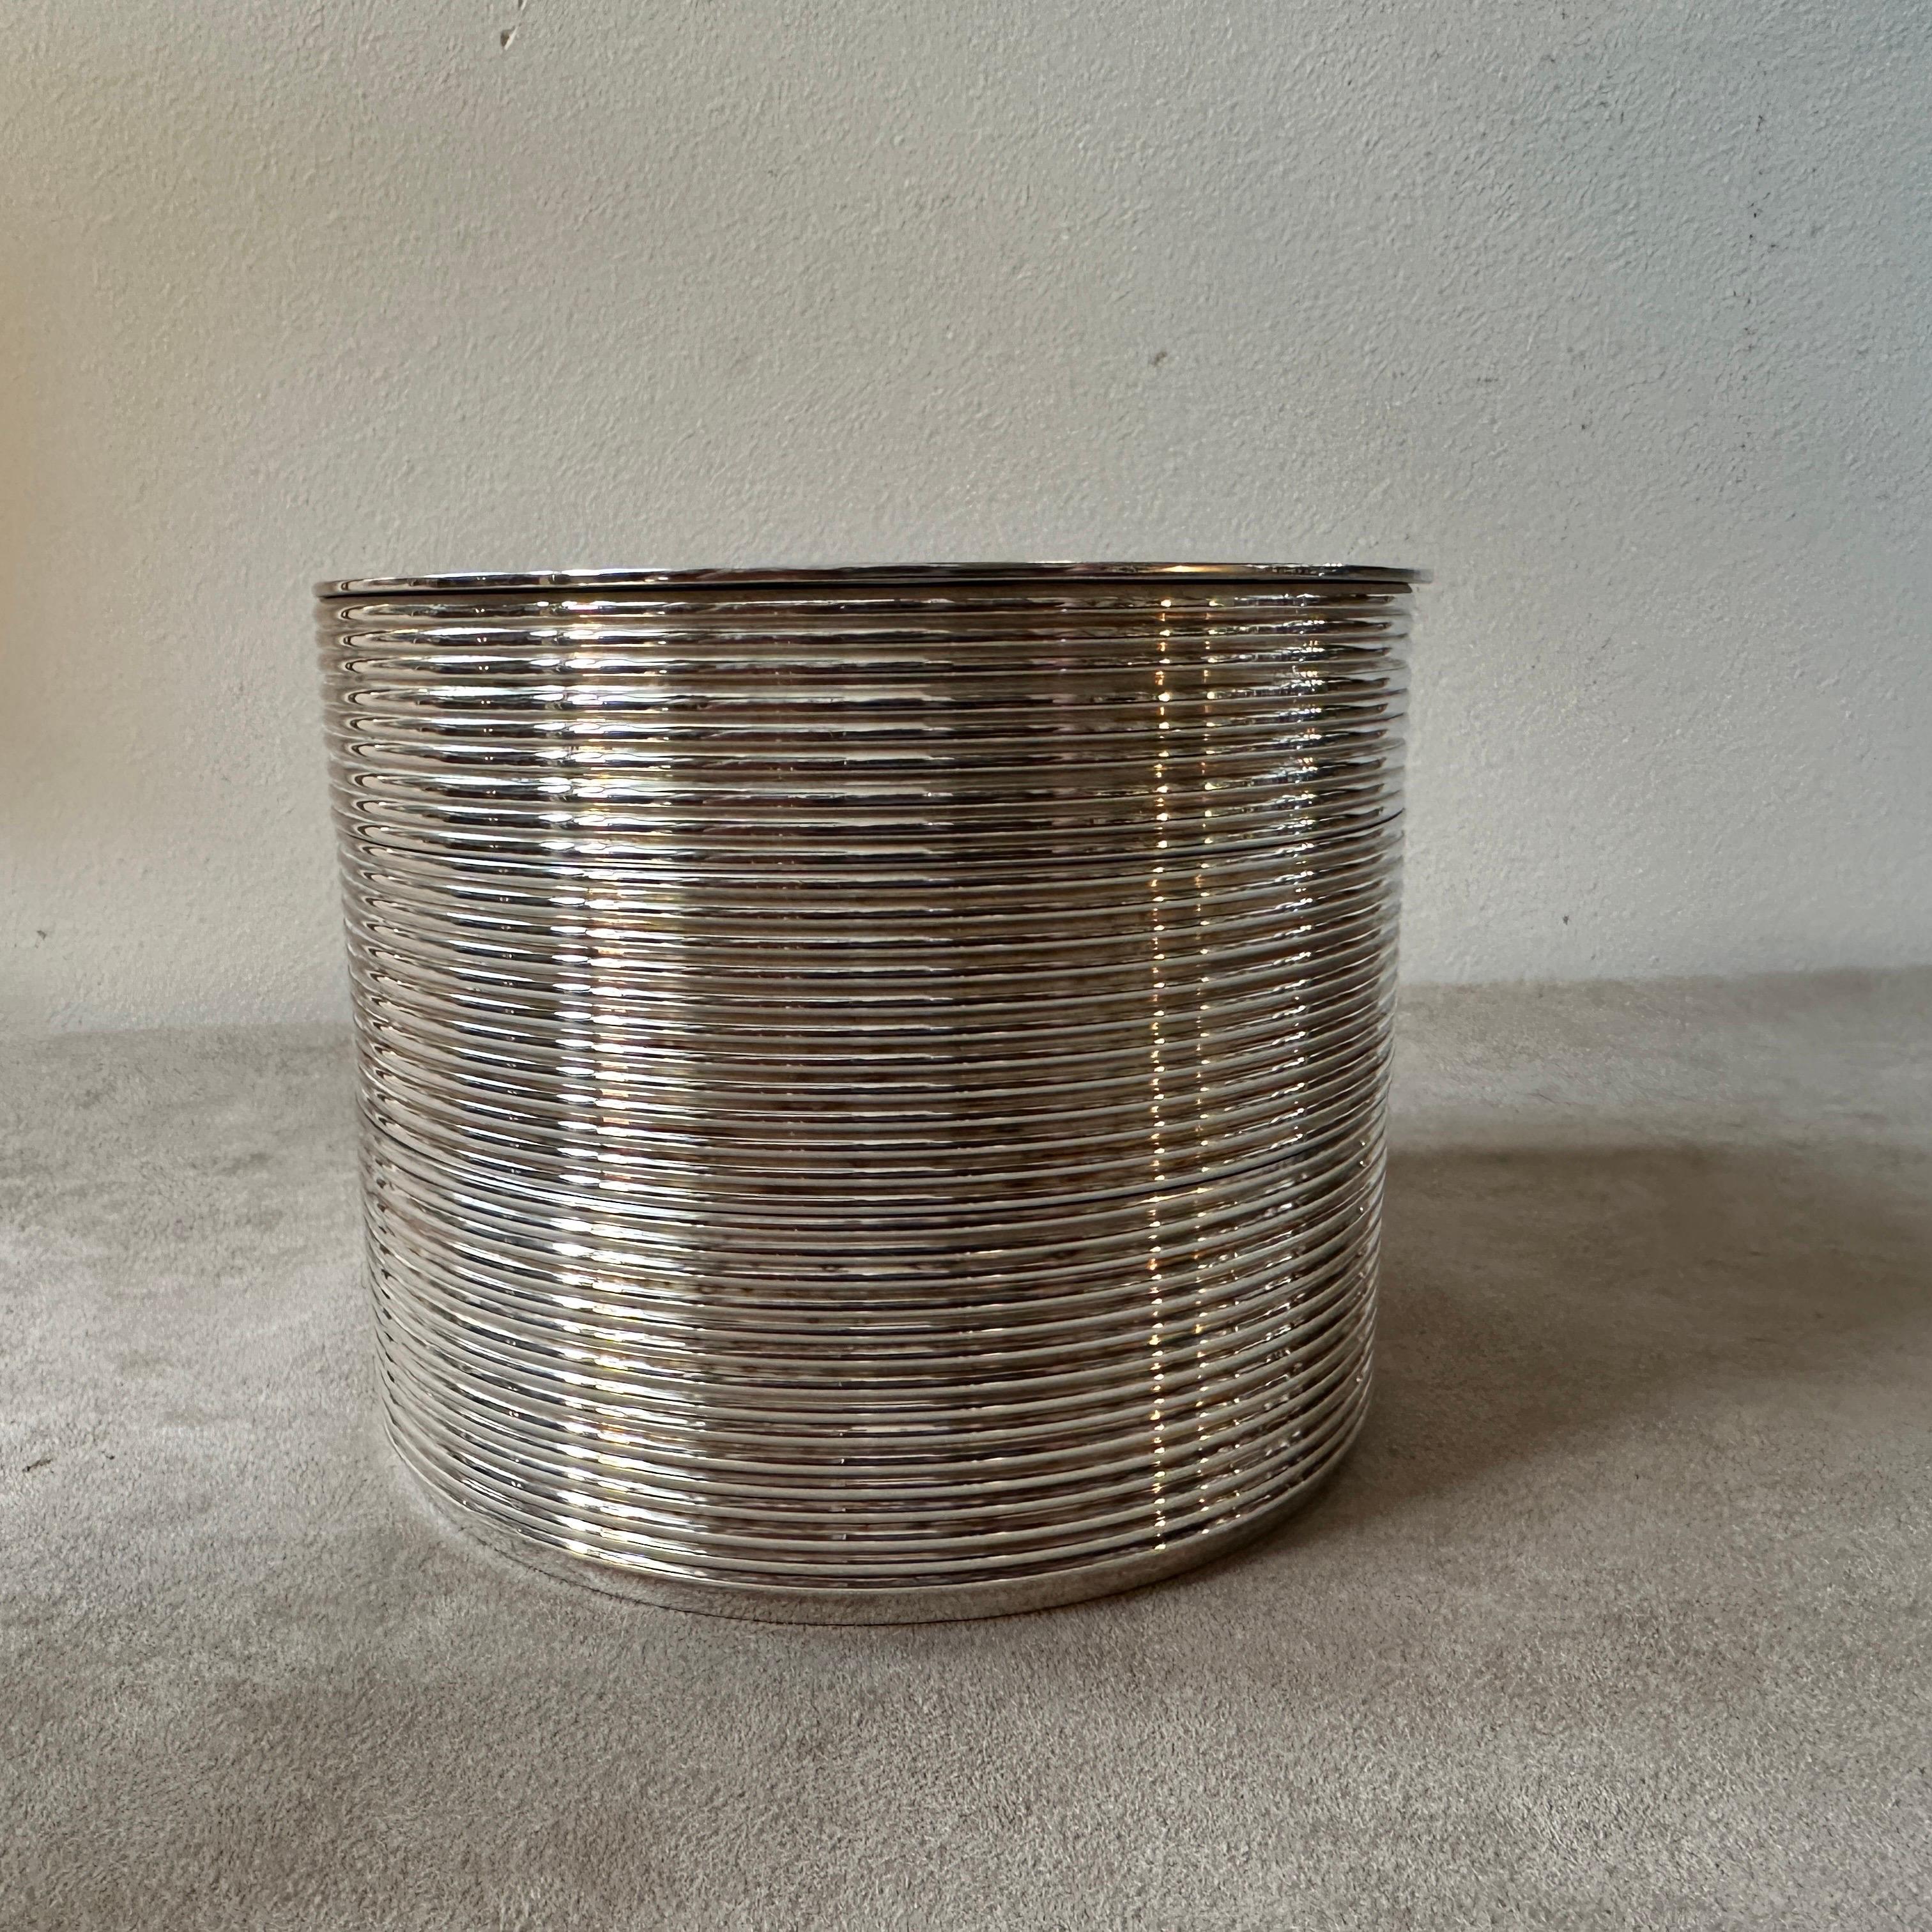 1990s Modern Design Silver Plated French Jewelry Box by Christofle For Sale 2